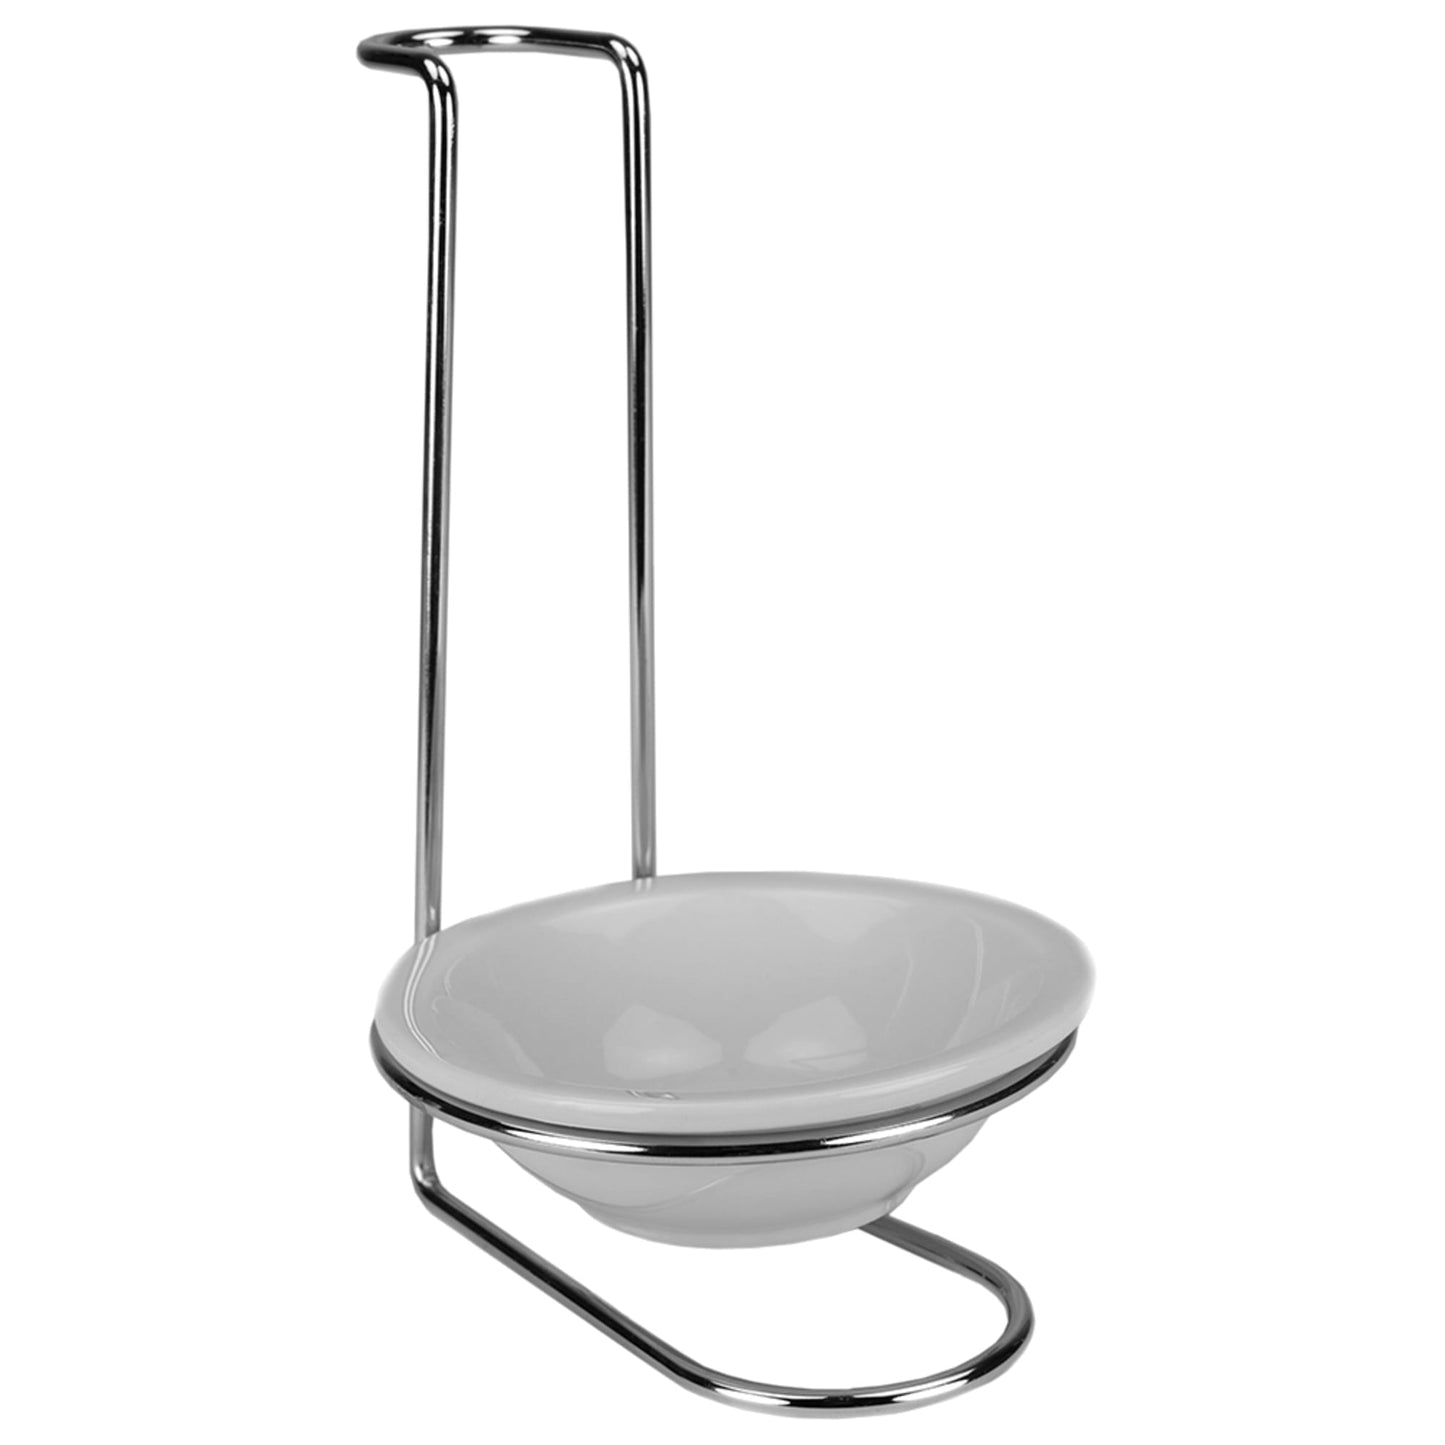 Spoon Rest with Tray and Spoon, Chrome